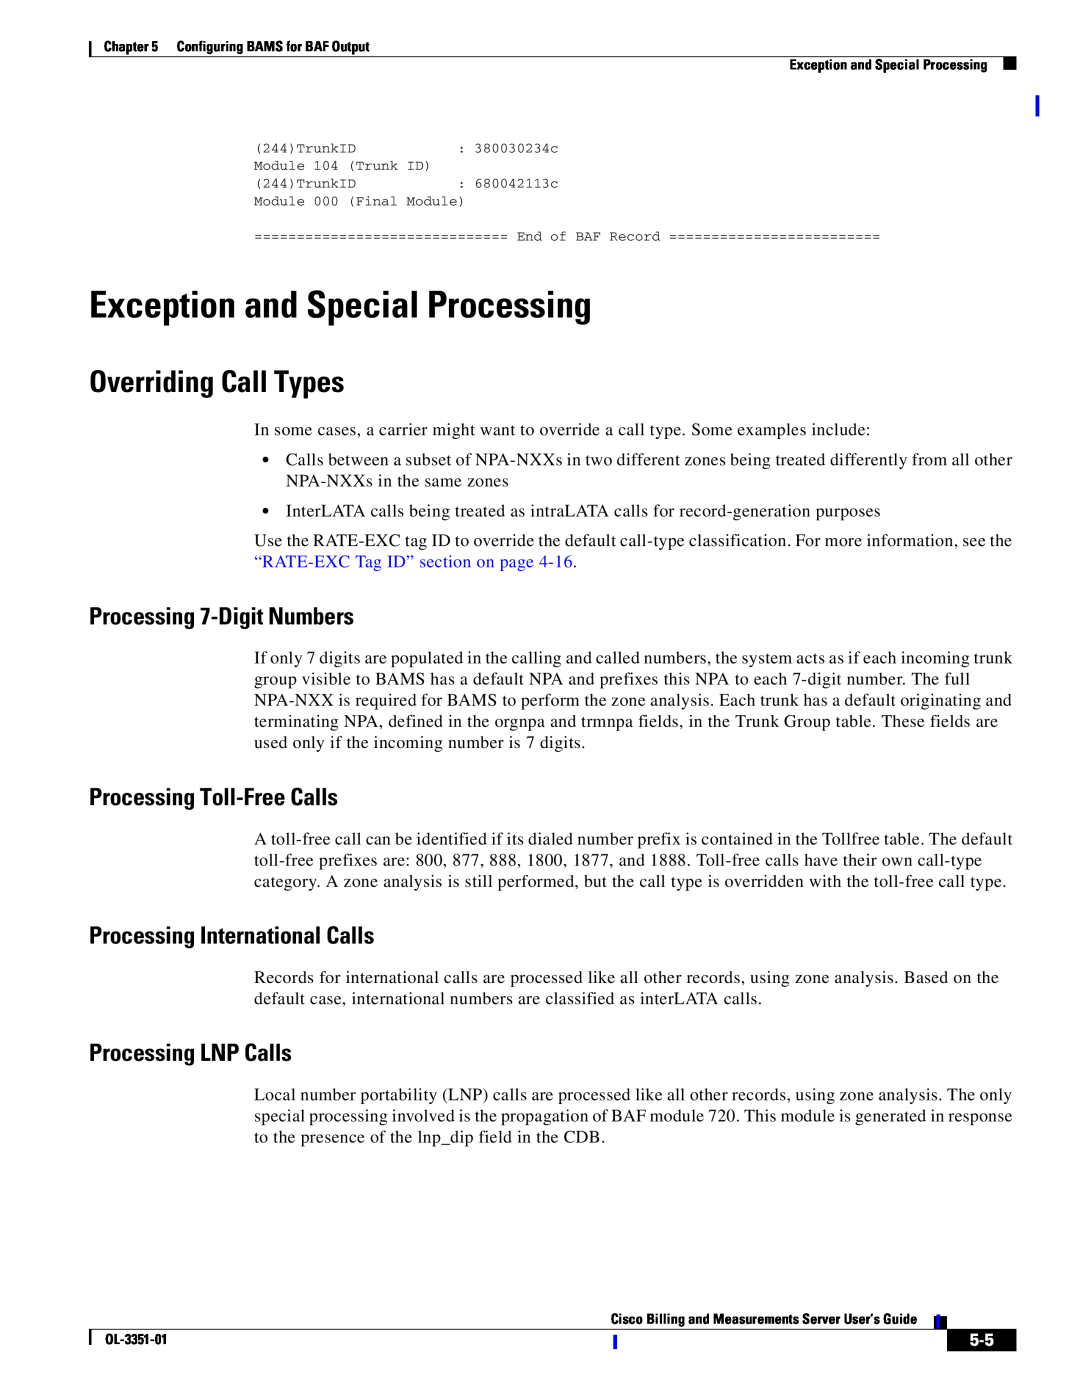 Cisco Systems OL-3351-01 manual Exception and Special Processing, Overriding Call Types, Processing 7-Digit Numbers 